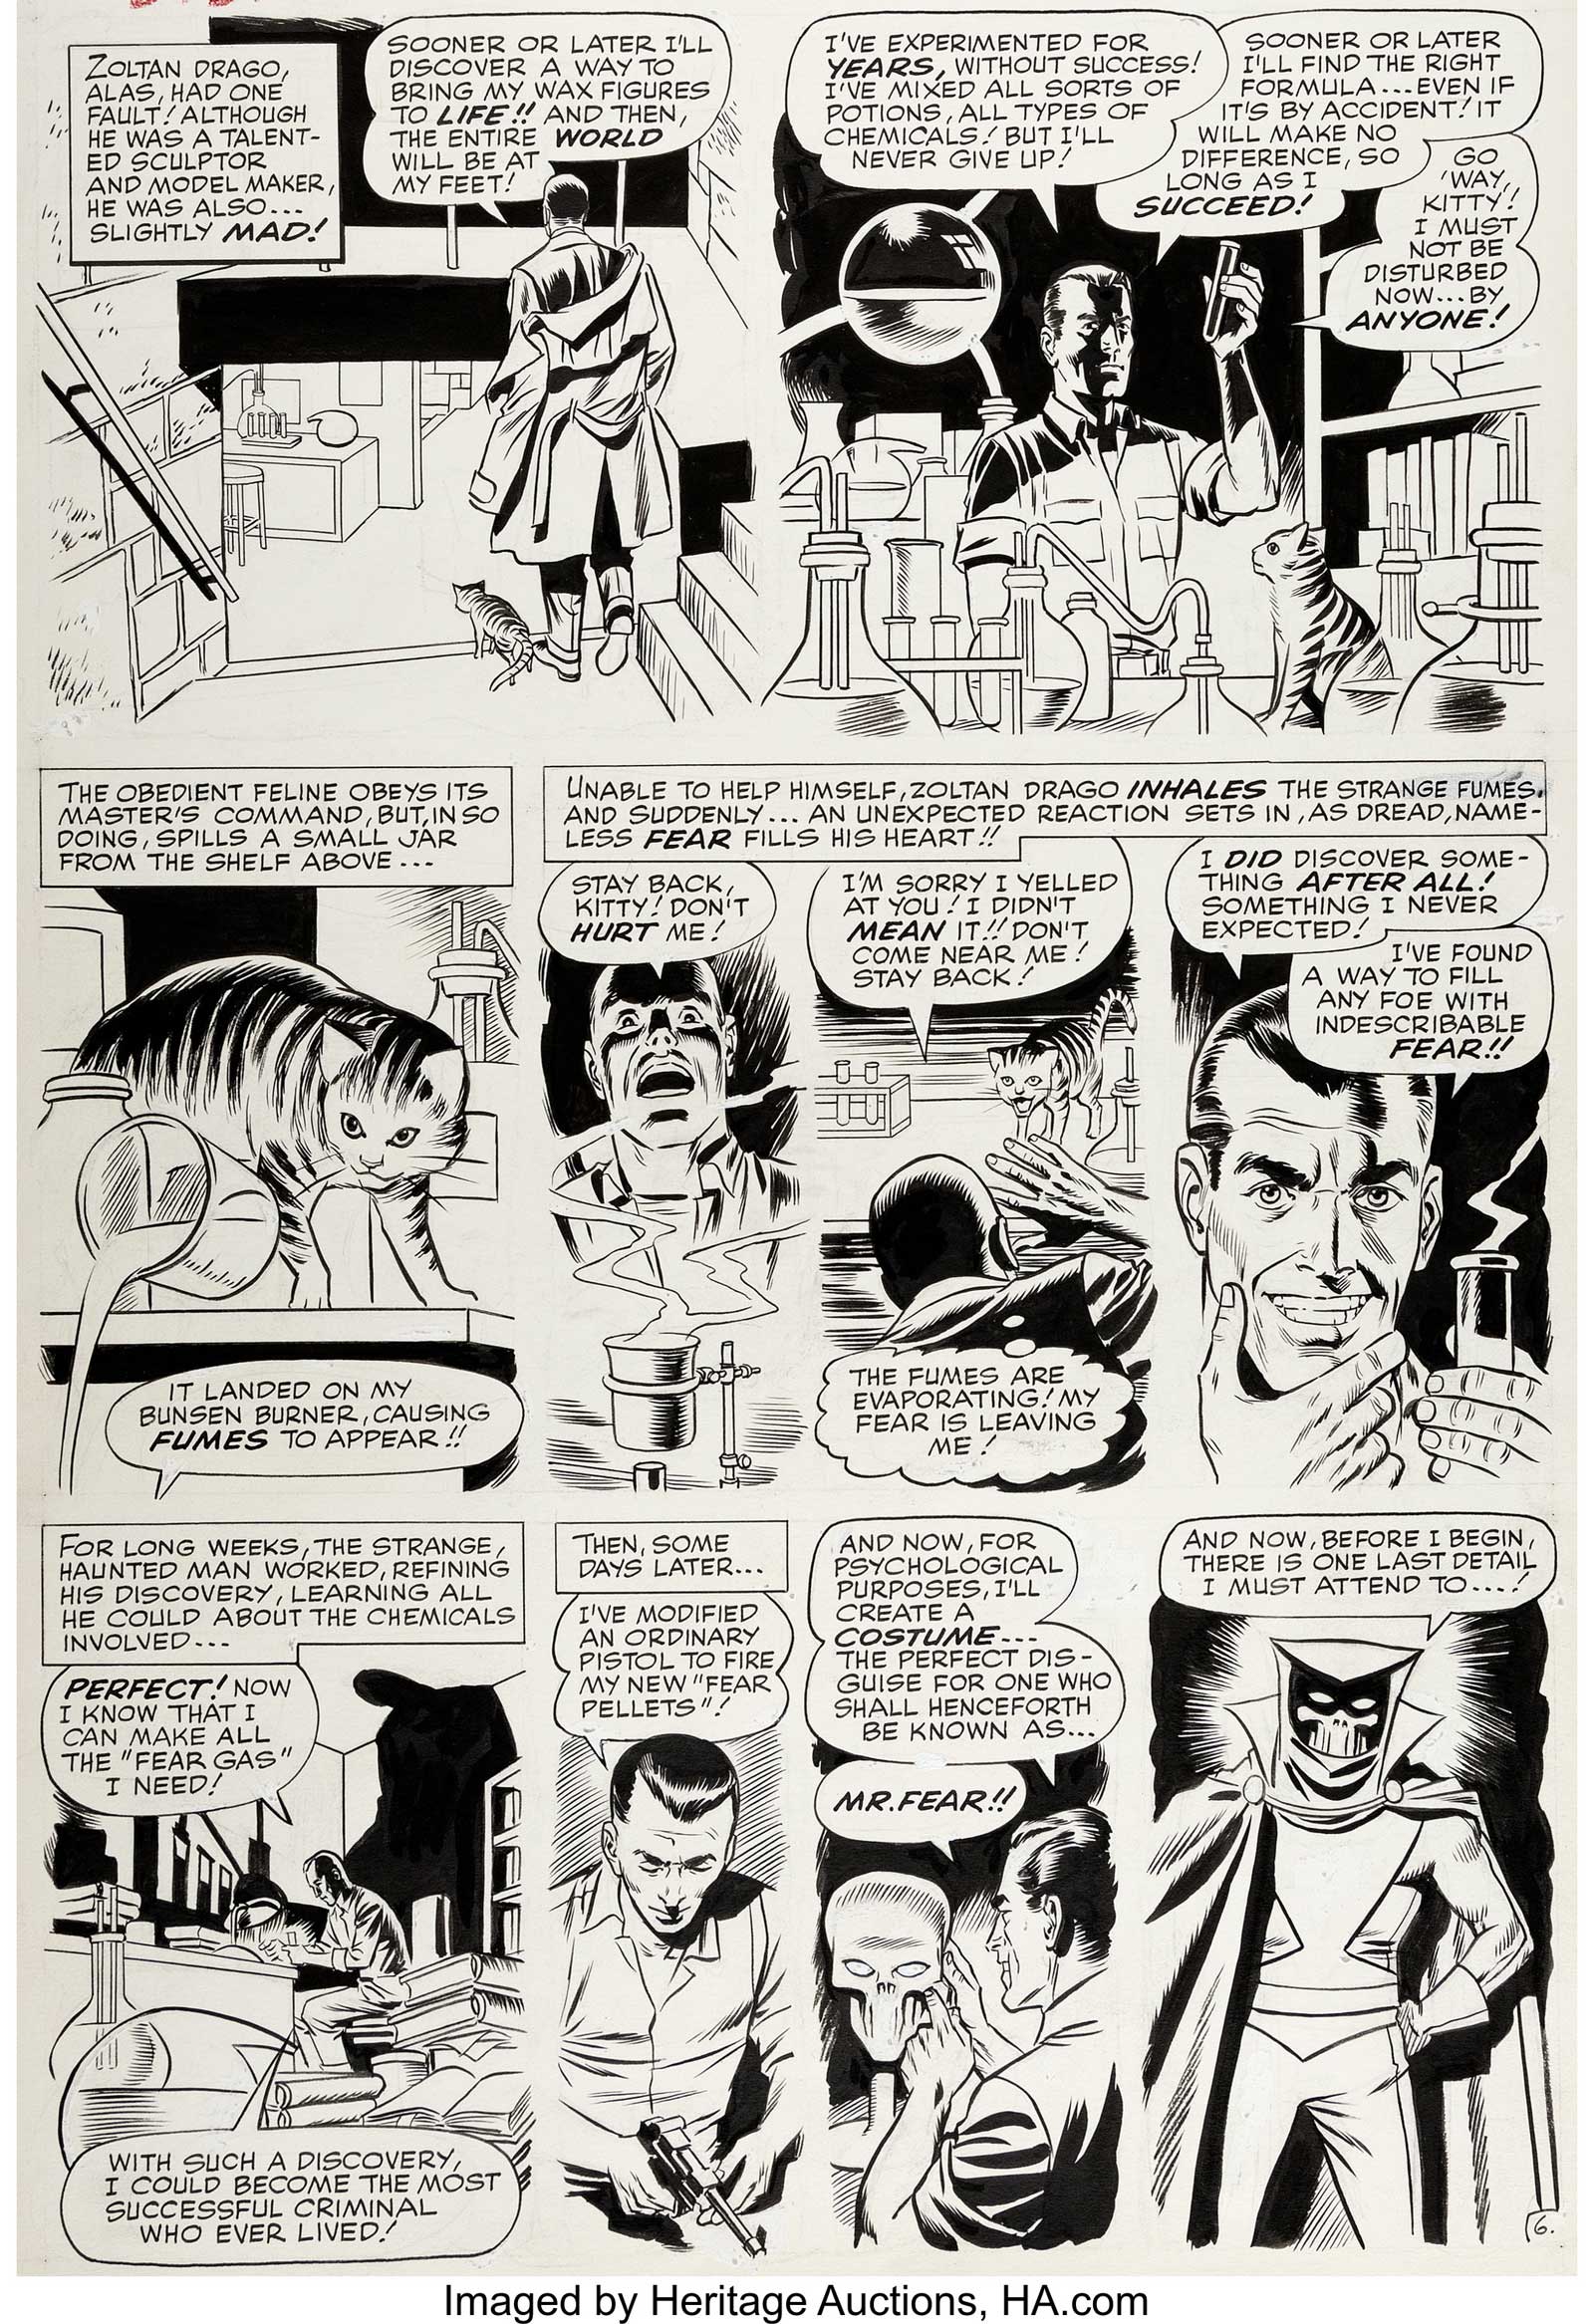 Daredevil #6 Page 6 Original Art by Wally Wood (Marvel, 1965). An unusual origin story for this villain... Zoltan Drago, a wanna-be "Puppet Master", accidentally creates a "Fear Gas" and decides to become Mr. Fear. A nice capsulised one-page origin, as rendered by the awesome talents of Wally Wood